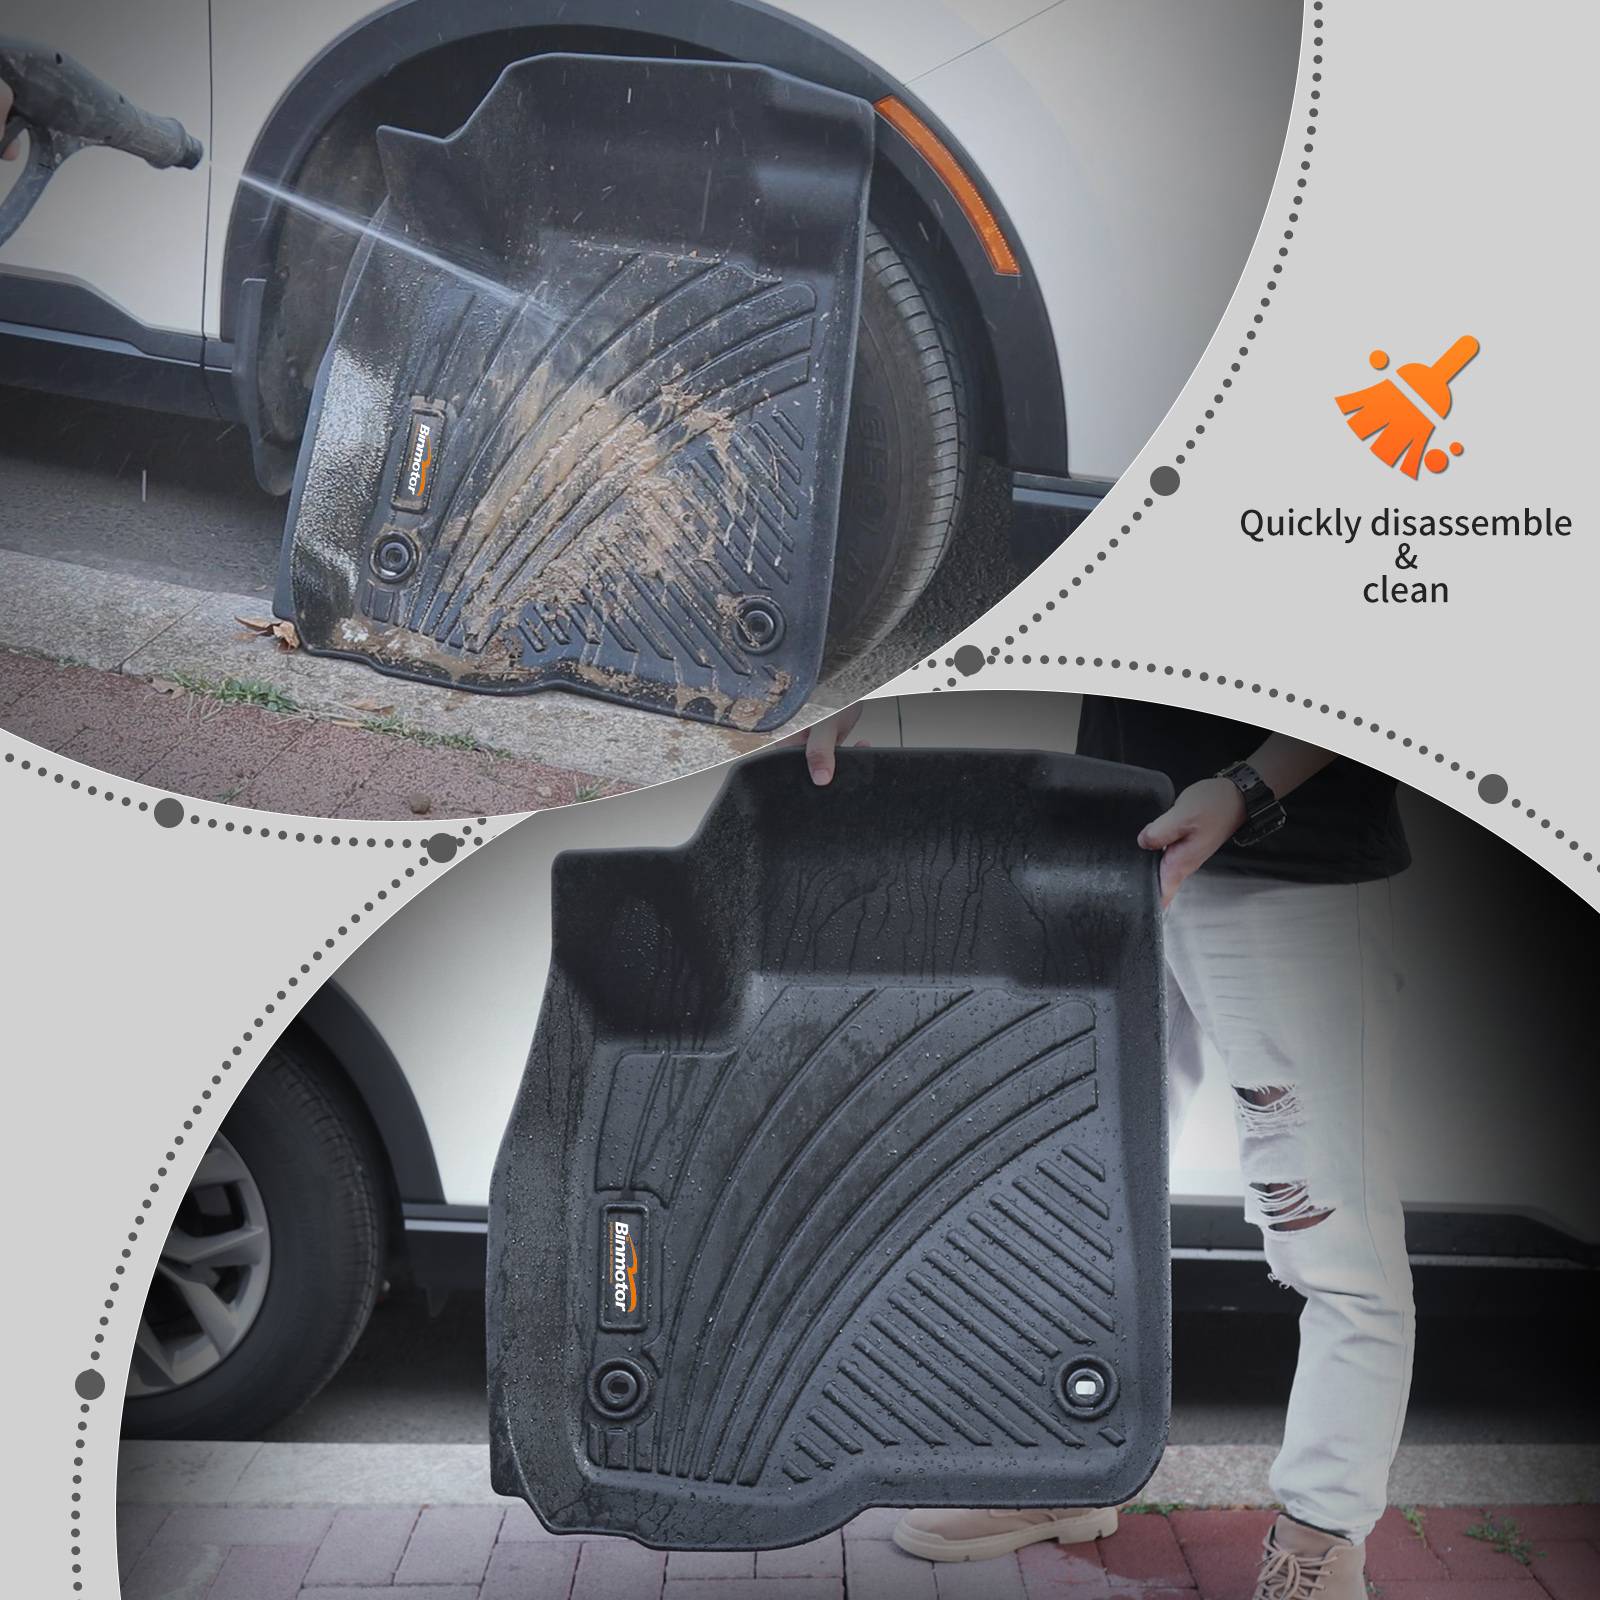 Binmotor-Floor Mats for Toyota RAV4 Hybrid Models - Custom Car Mats - Maximum Coverage, All Weather, Laser Measured - This Full Set Includes 1st and 2nd Rows Black（compatible year 2019-2024）